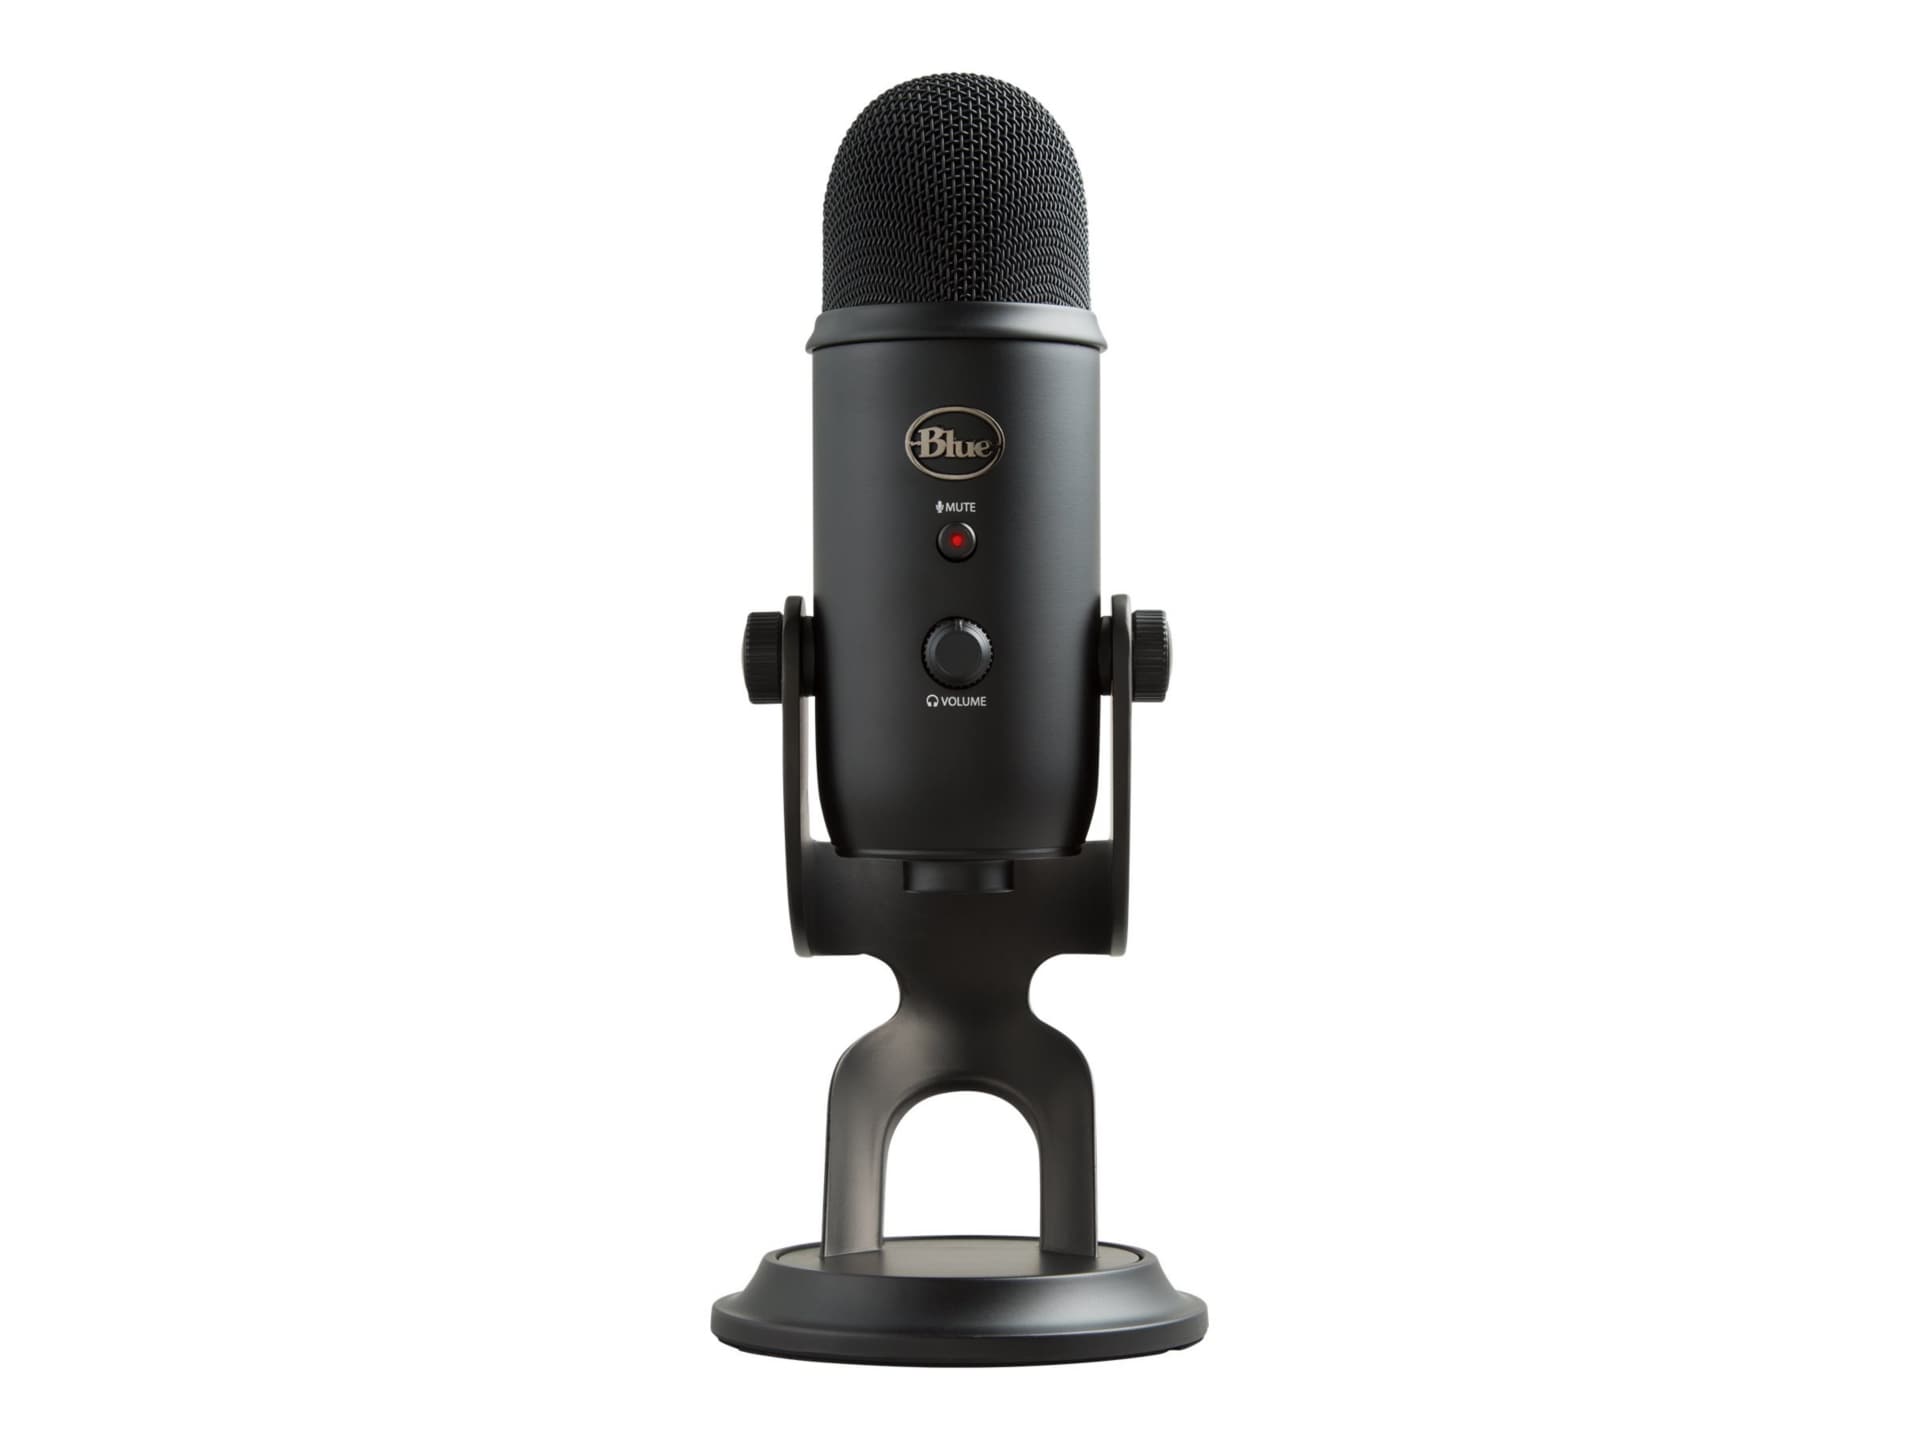 The New Blue Yeti Microphone Is the First Thing You Need to Start